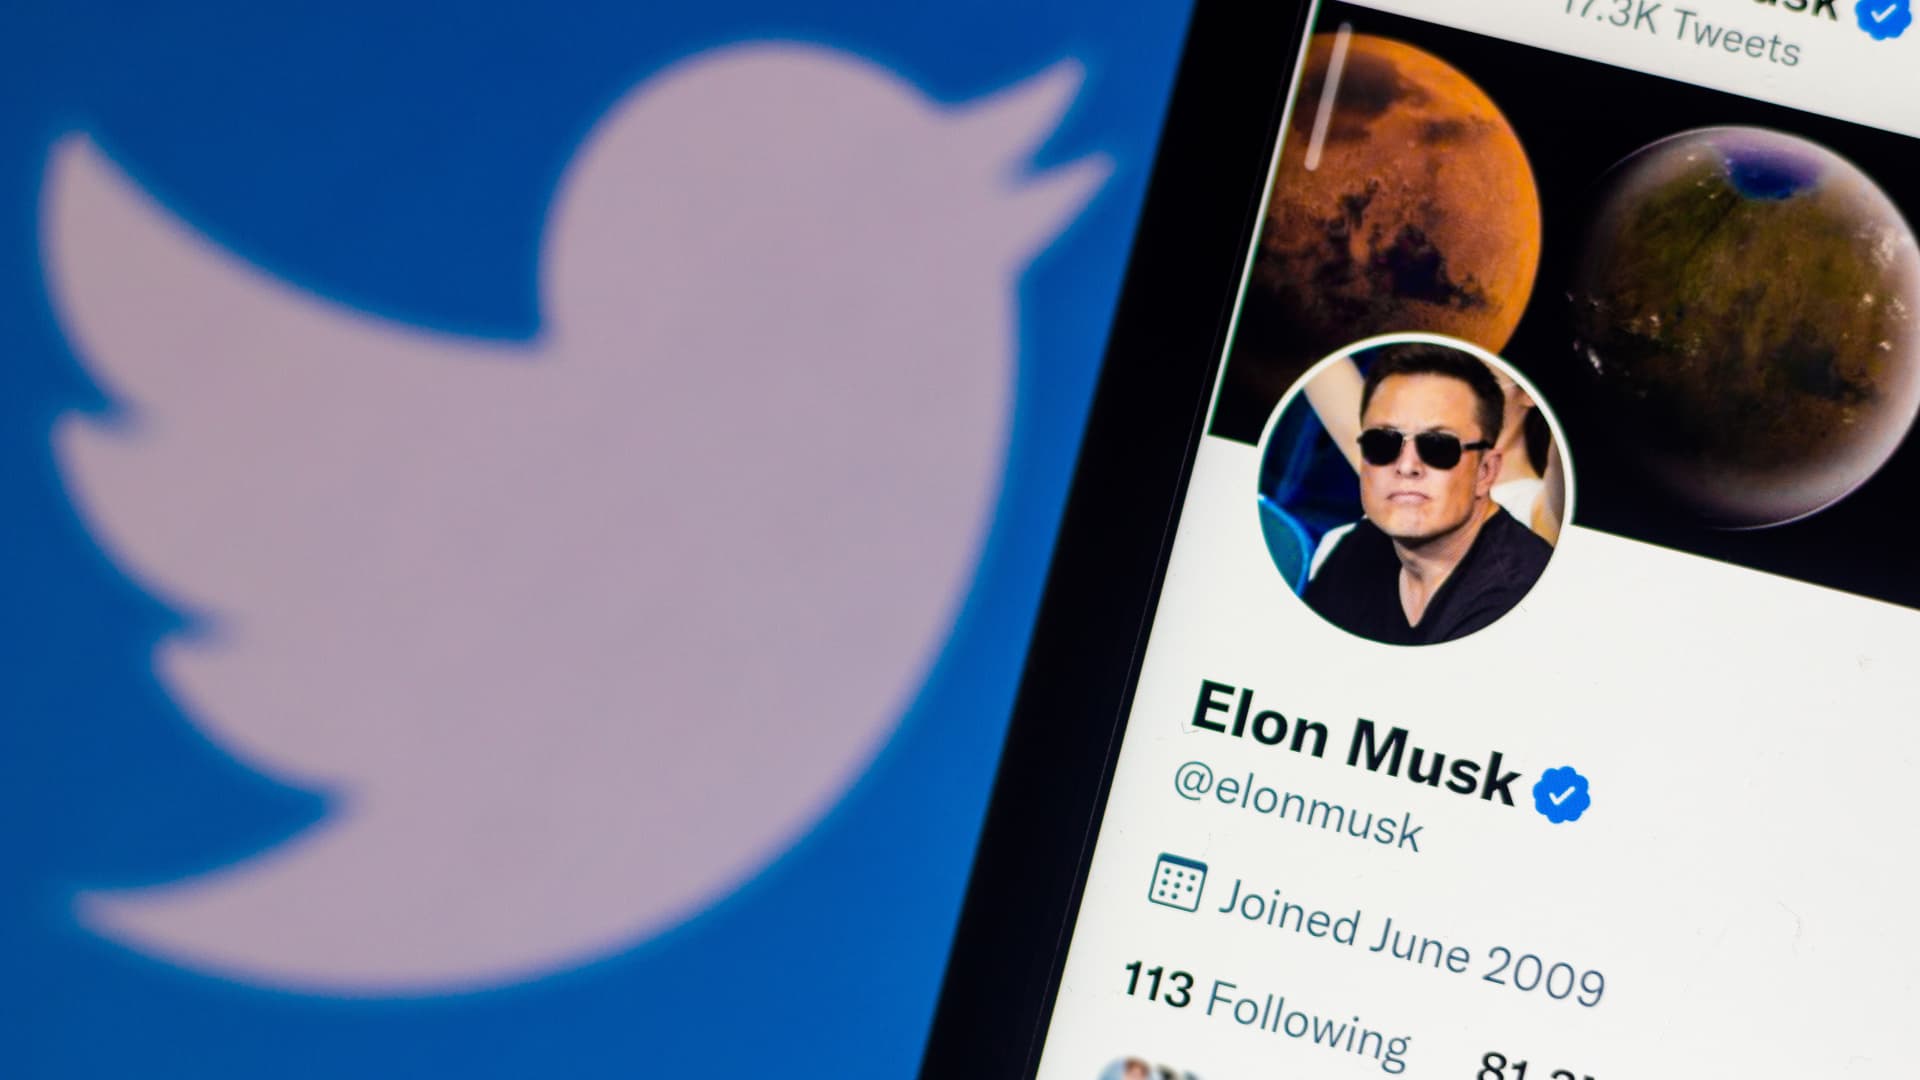 Twitter shares jump 5% on reports it could accept Elon Musk’s bid as early as Monday – CNBC